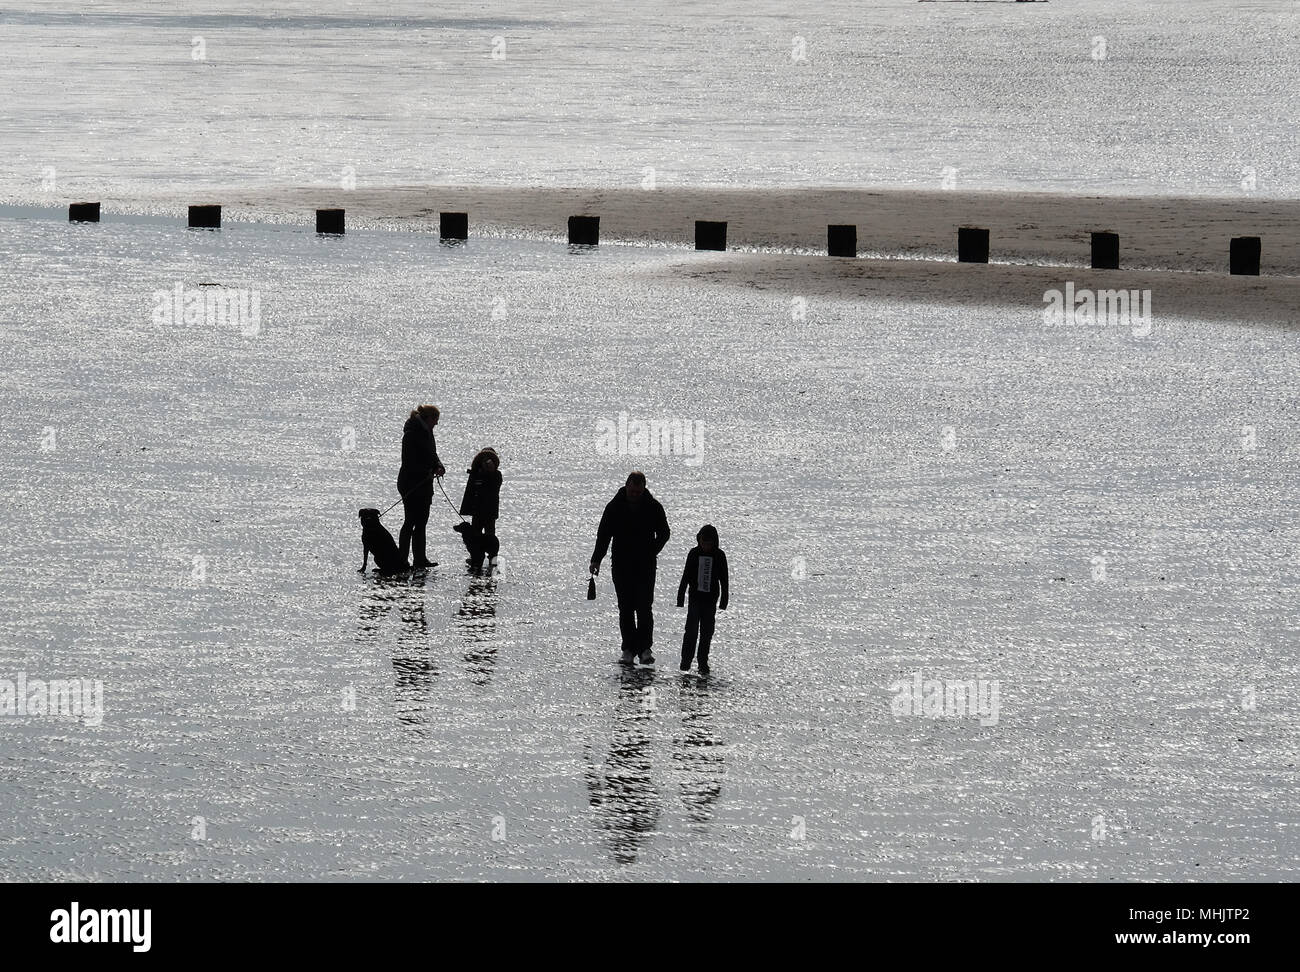 People in silhouette on beach at low tide walking dogs. Stock Photo